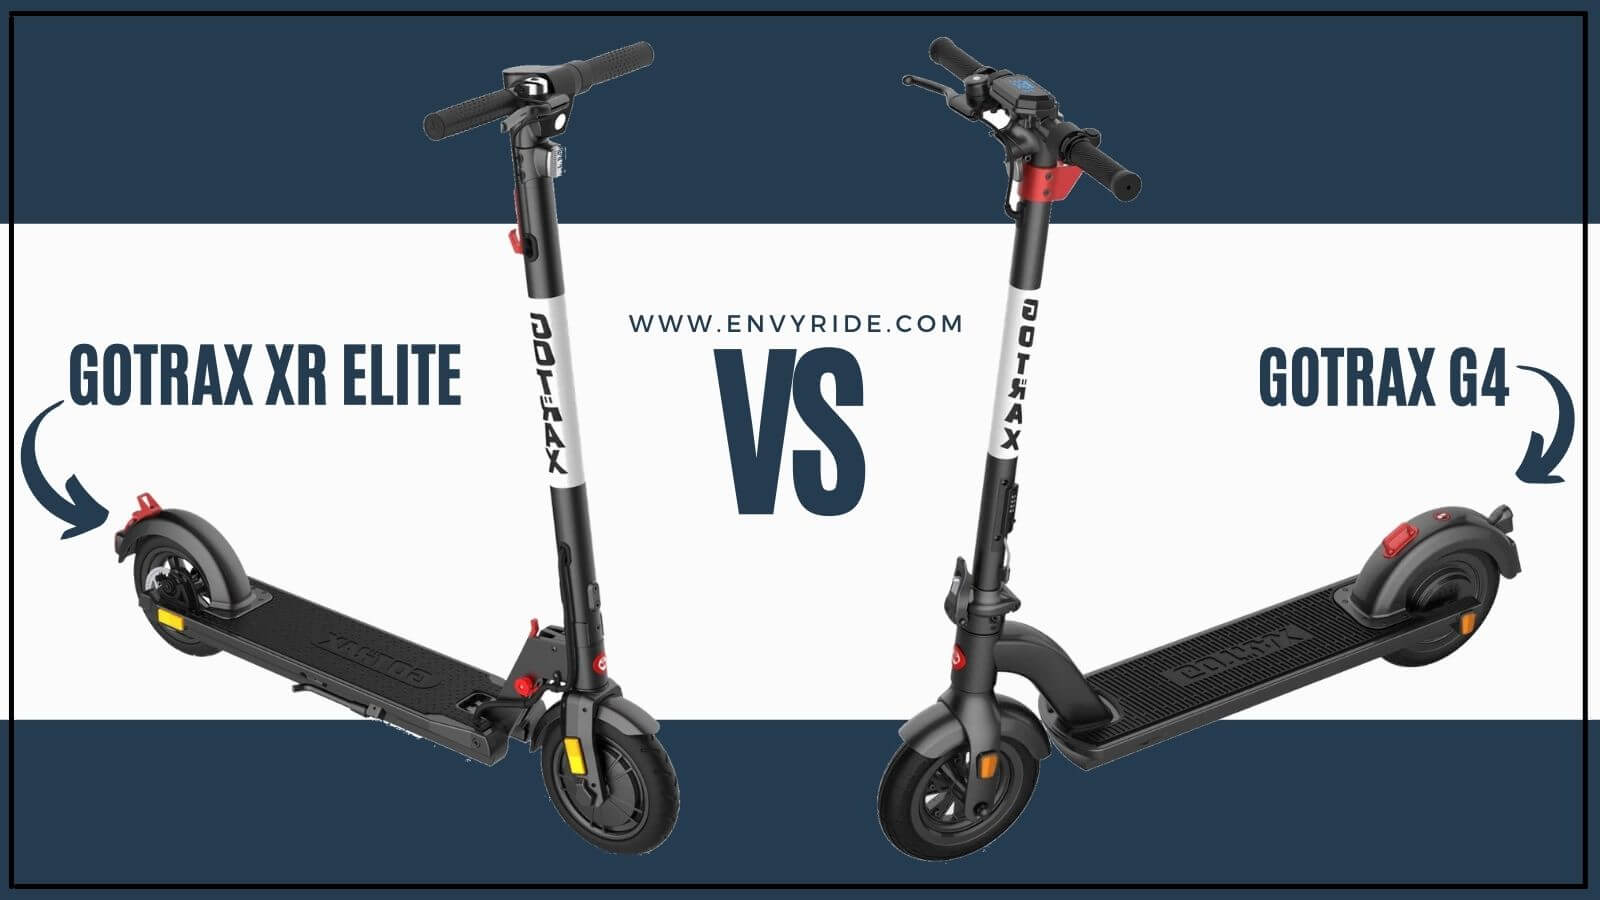 The GoTrax XR Elite Vs. the GoTrax G4 Electric Scooter